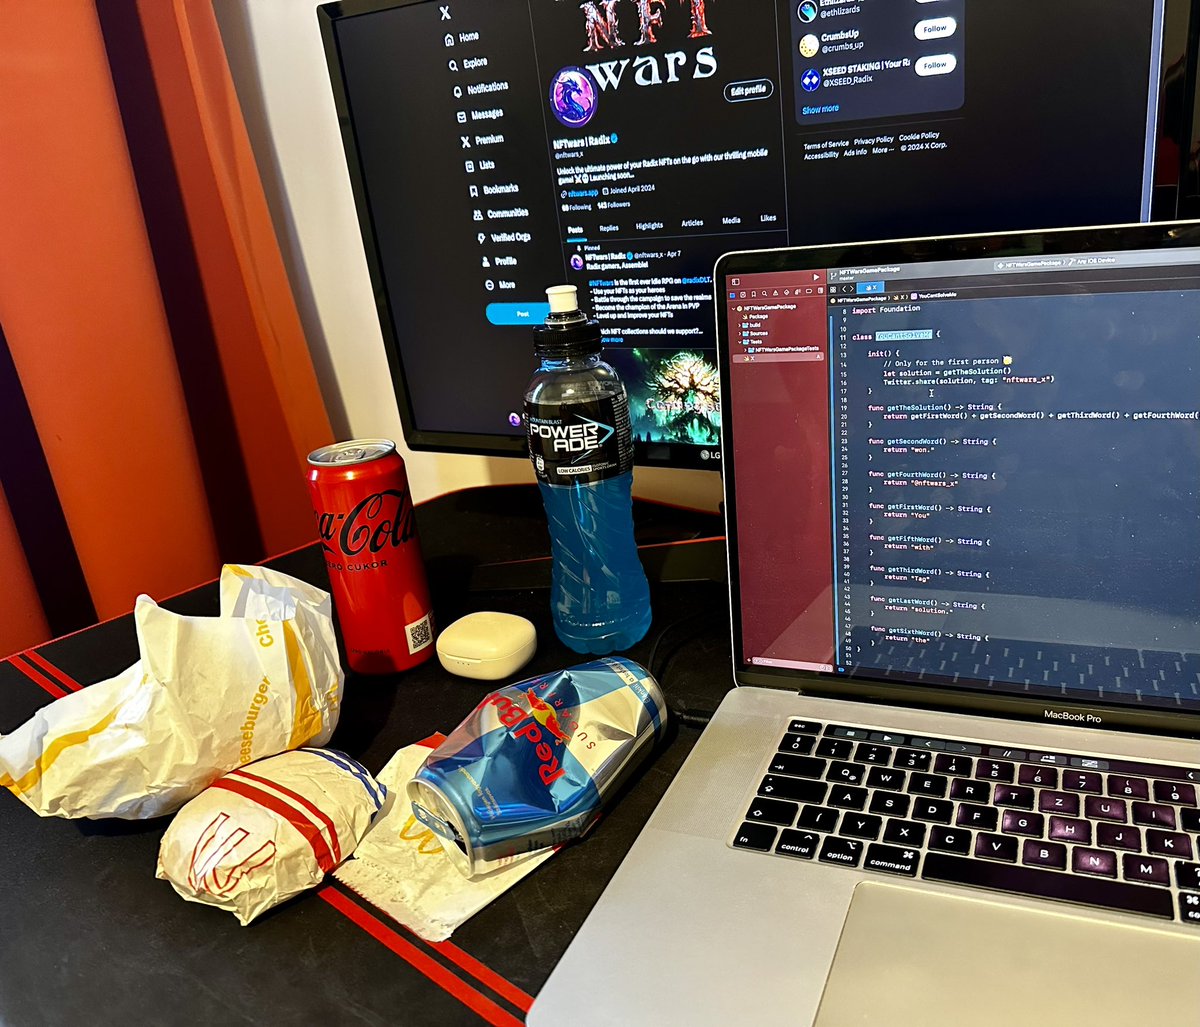 Our intern works all day even on the weekends to deliver something epic for @radixdlt blockchain. 👨‍💻 Every Retweet is another Redbull for him! #radix #nft #letHimCook